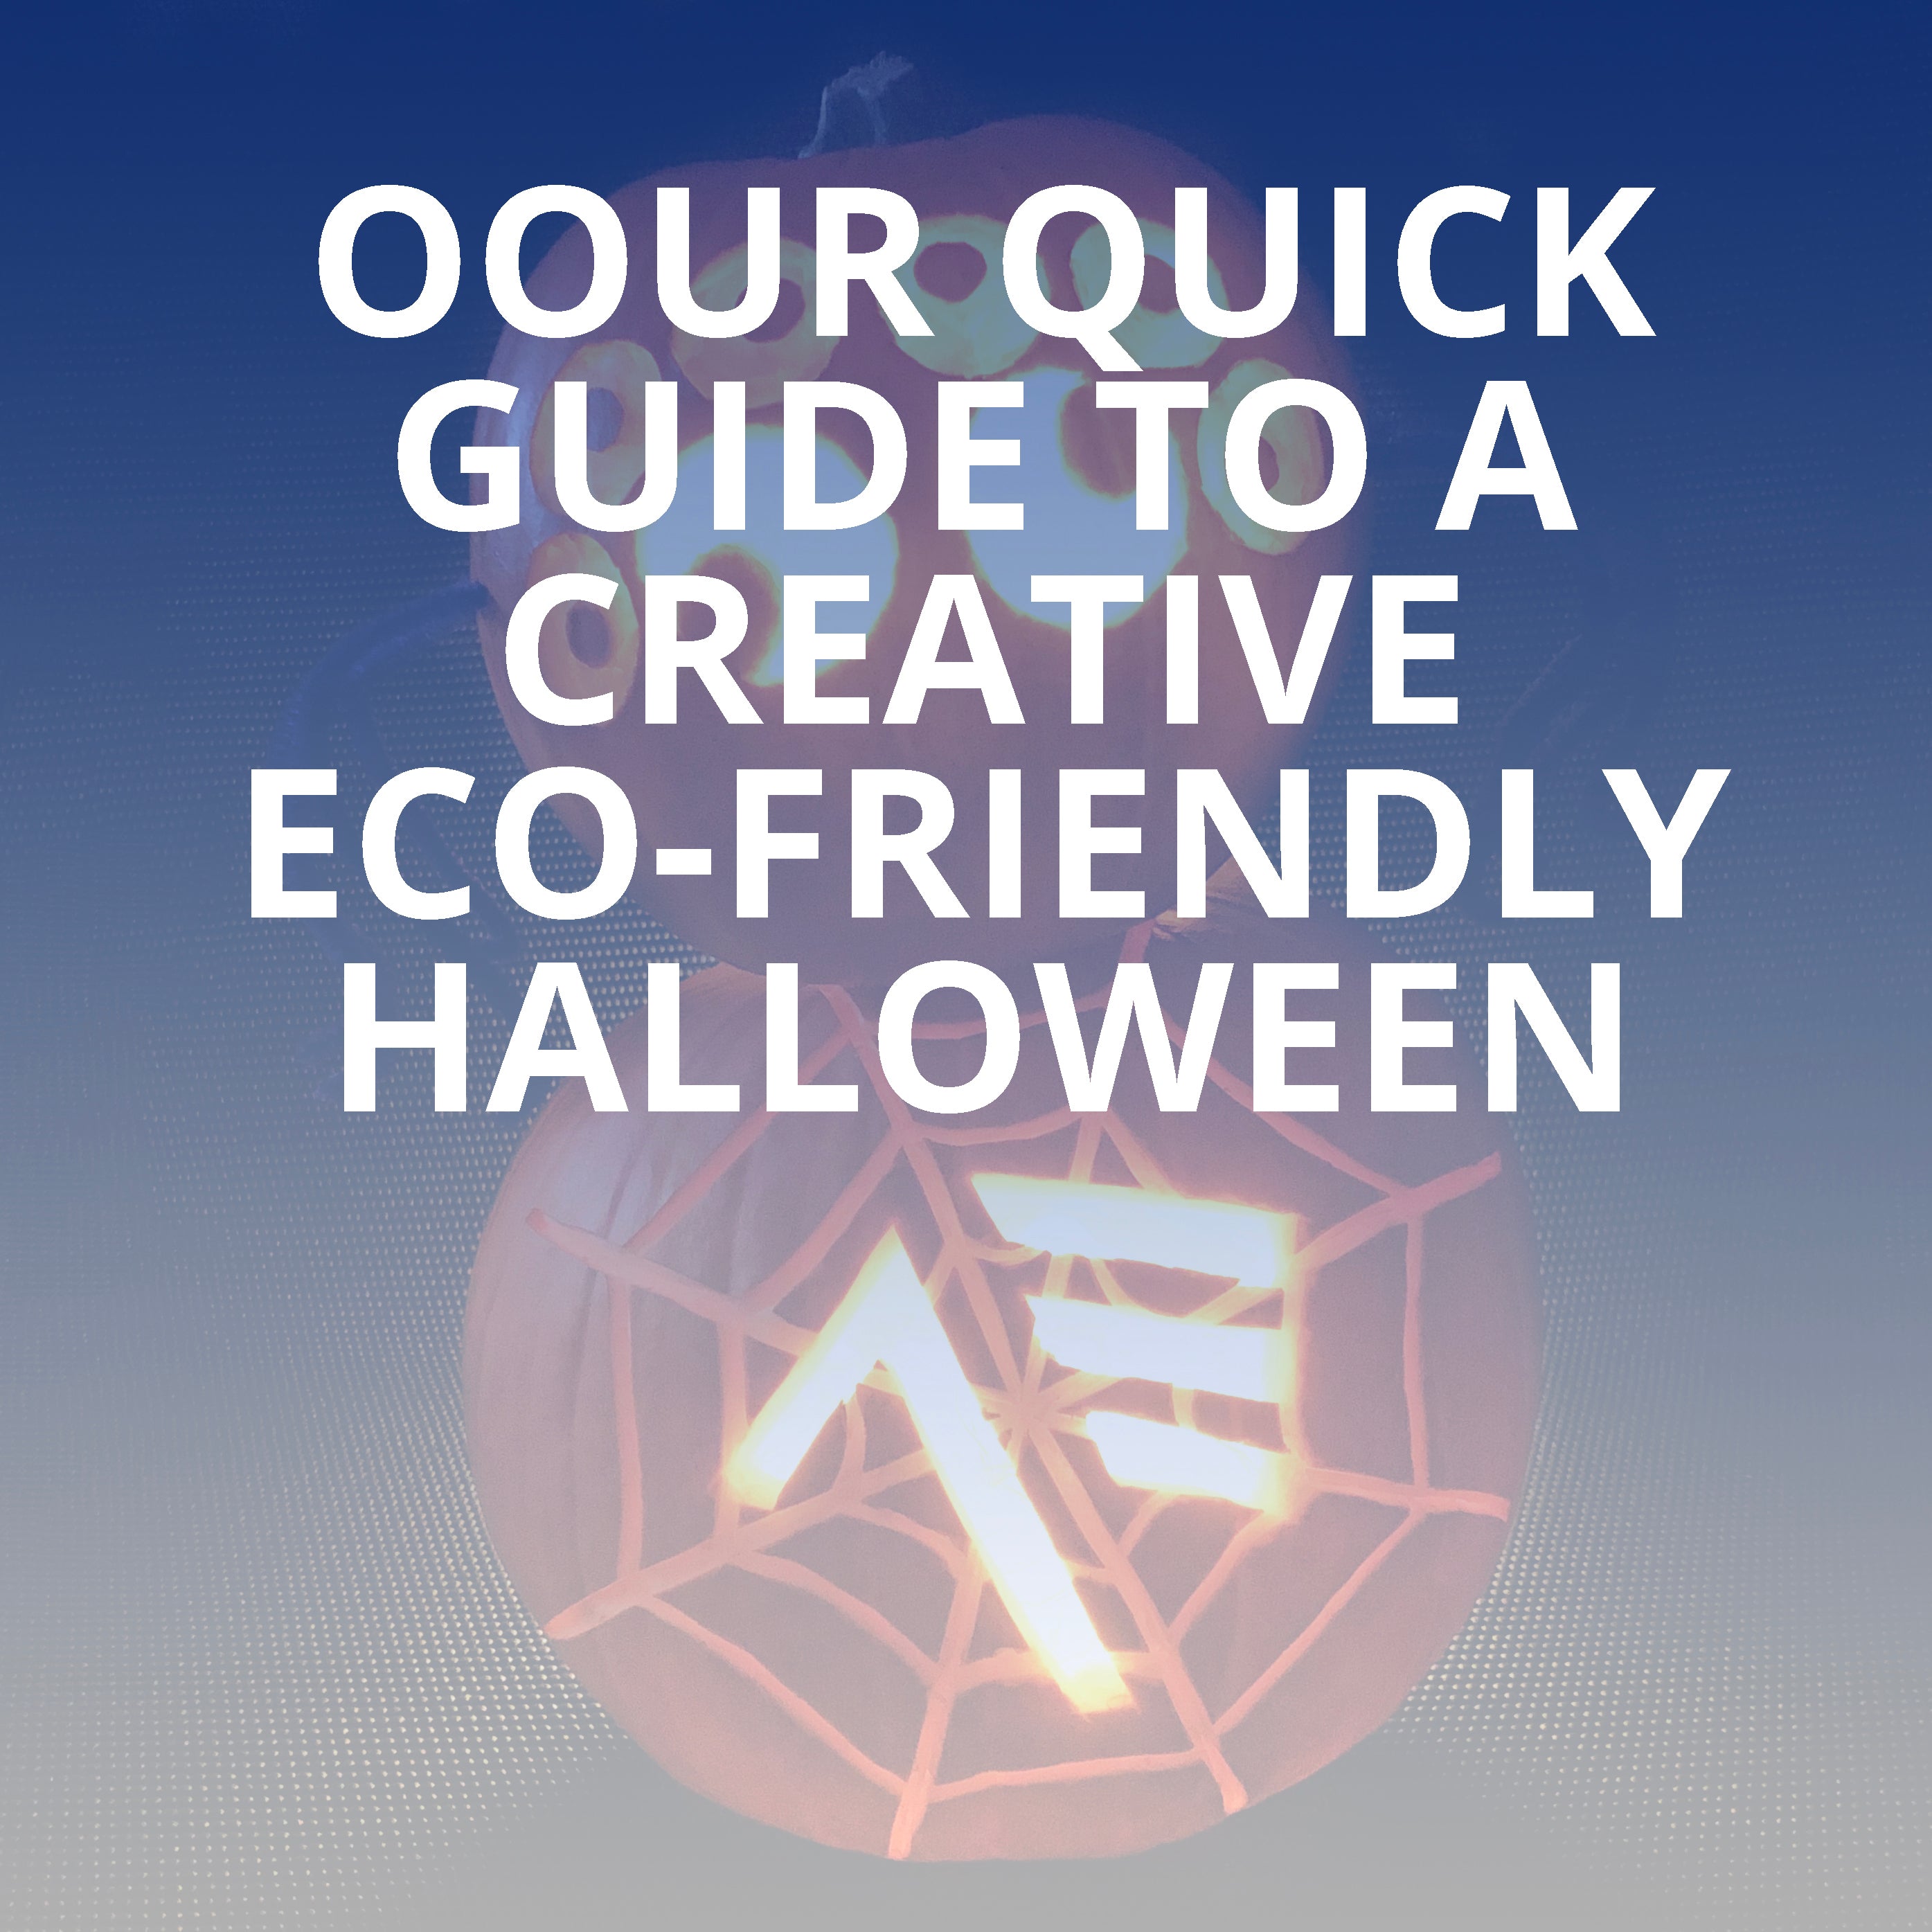 Our Quick Guide to a Creative Eco-Friendly Halloween